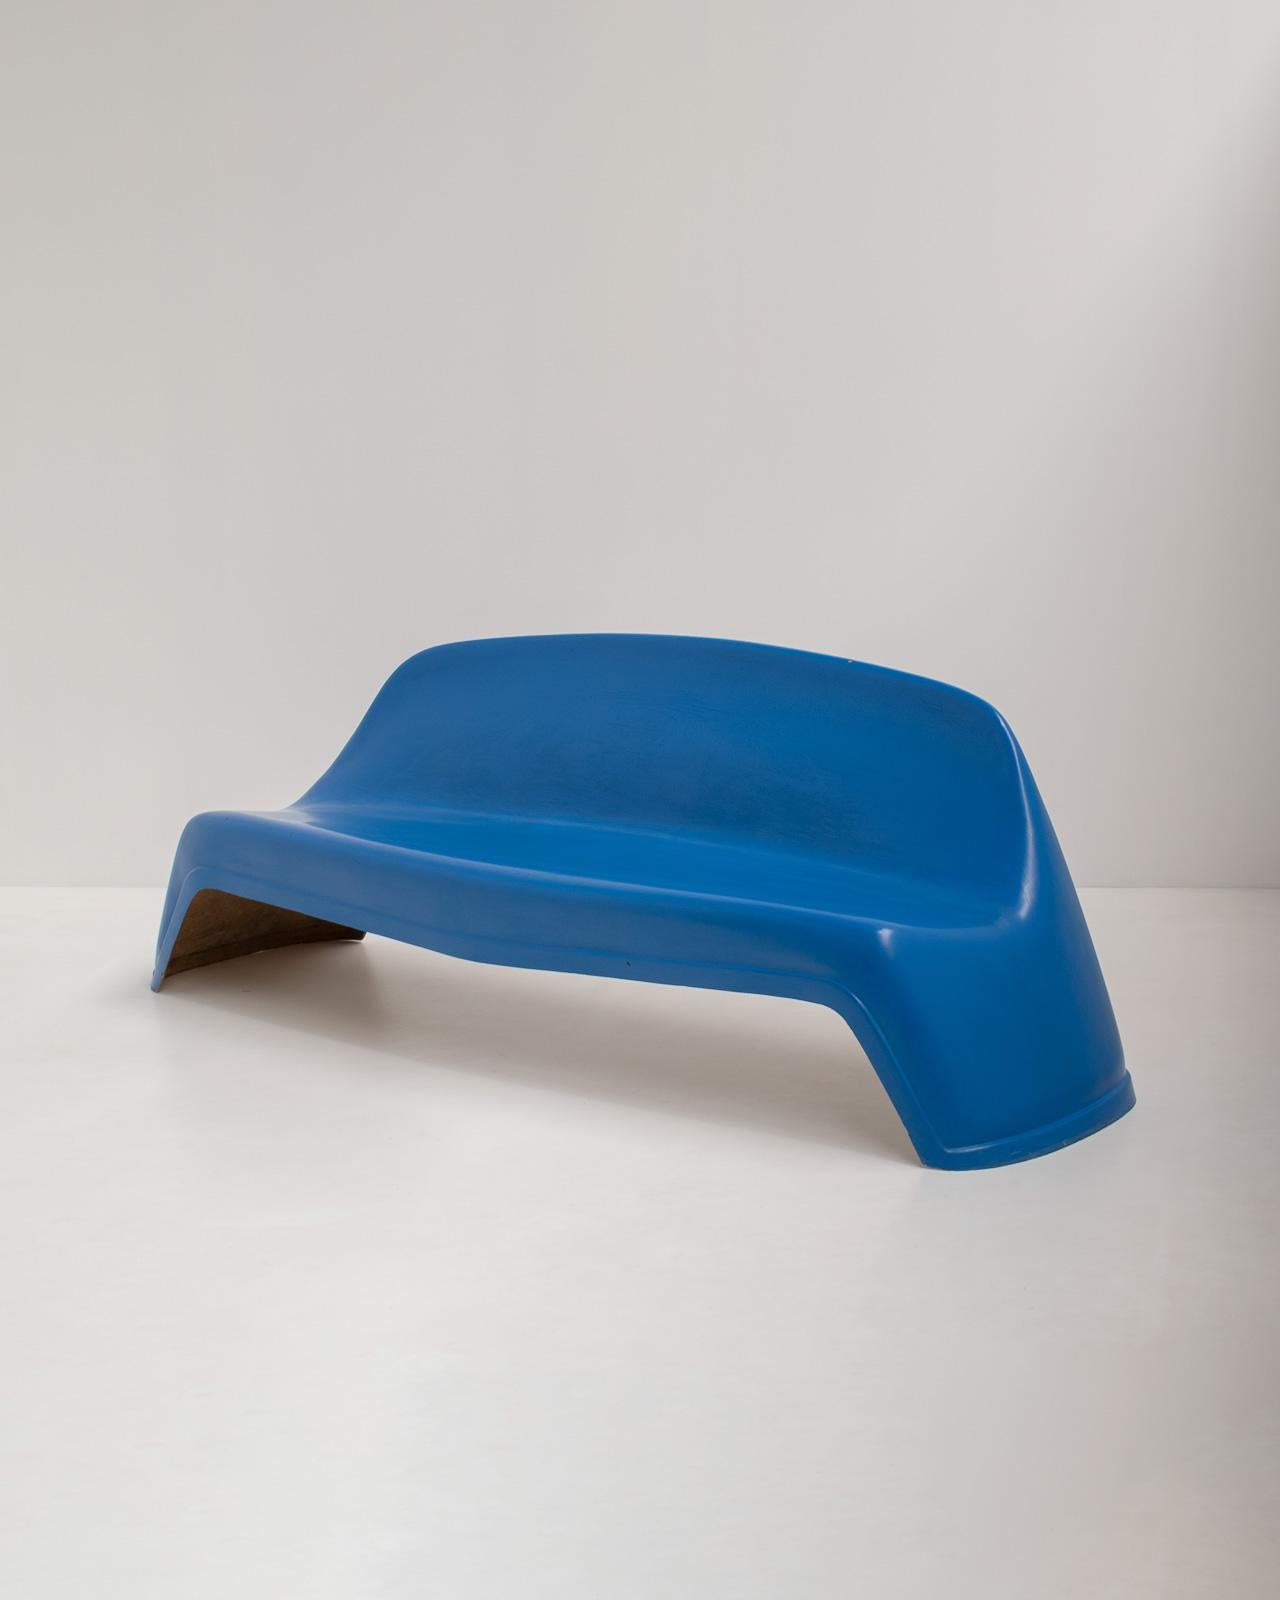 Blue Fiberglass Bench by Walter Papst for Wilkhahn, Germany, 1960s For Sale 6